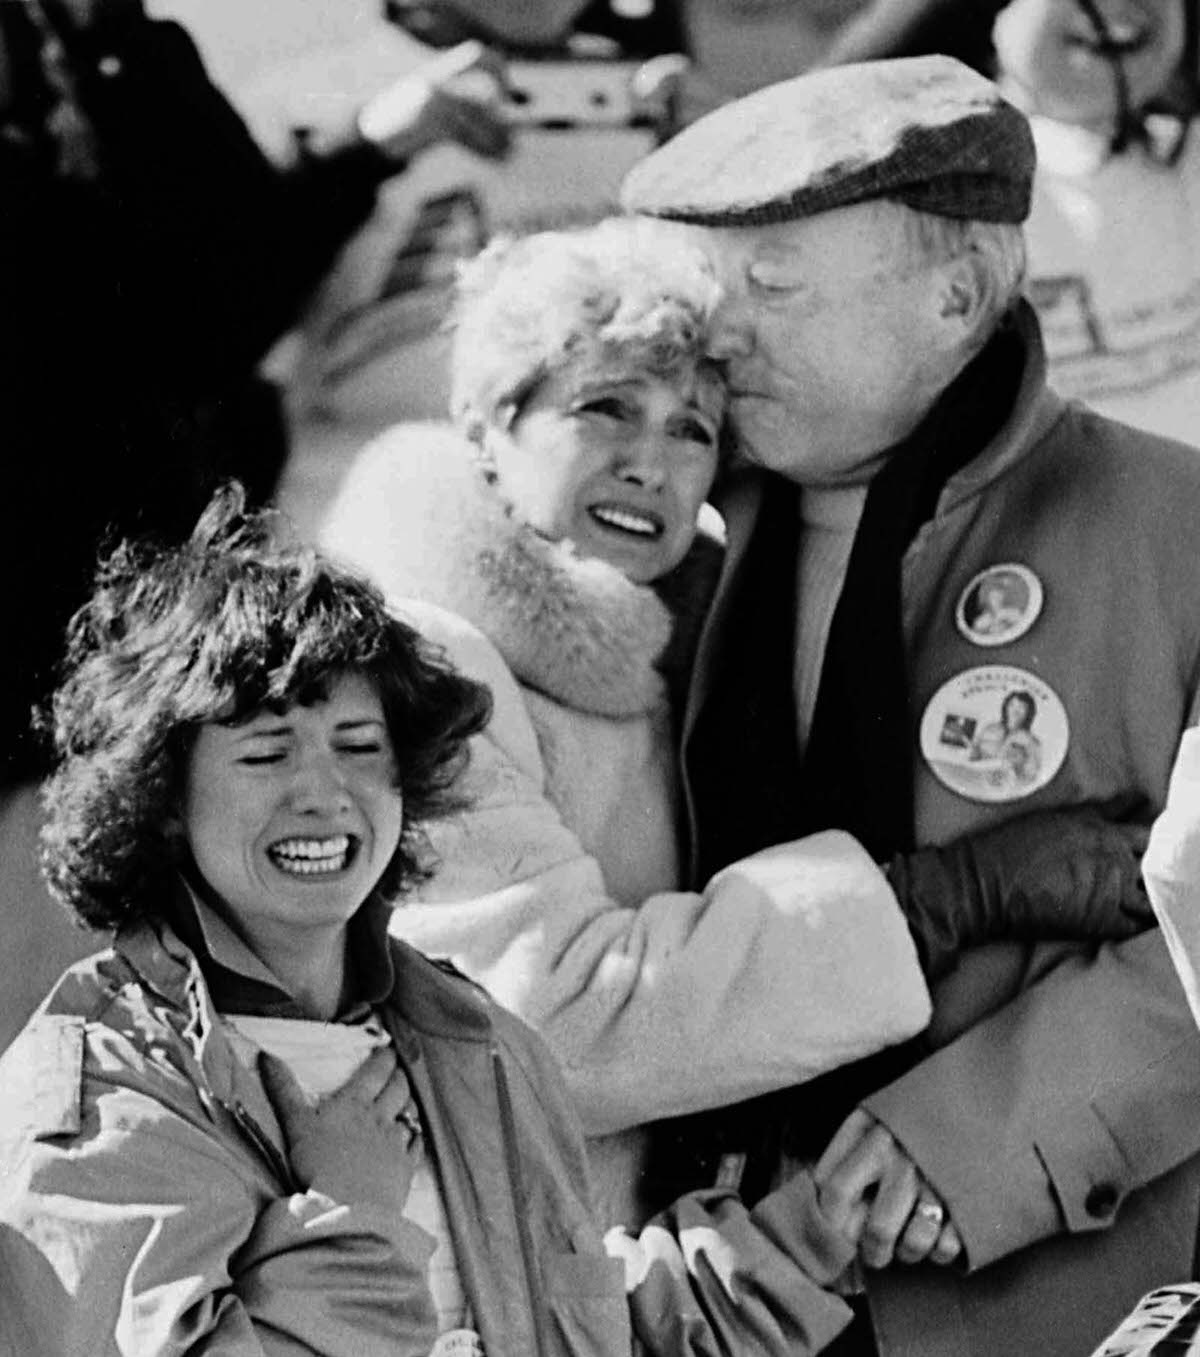 Christa McAuliffe’s sister Betsy and parents Ed and Grace Corrigan react in anguish to the explosion of the shuttle.